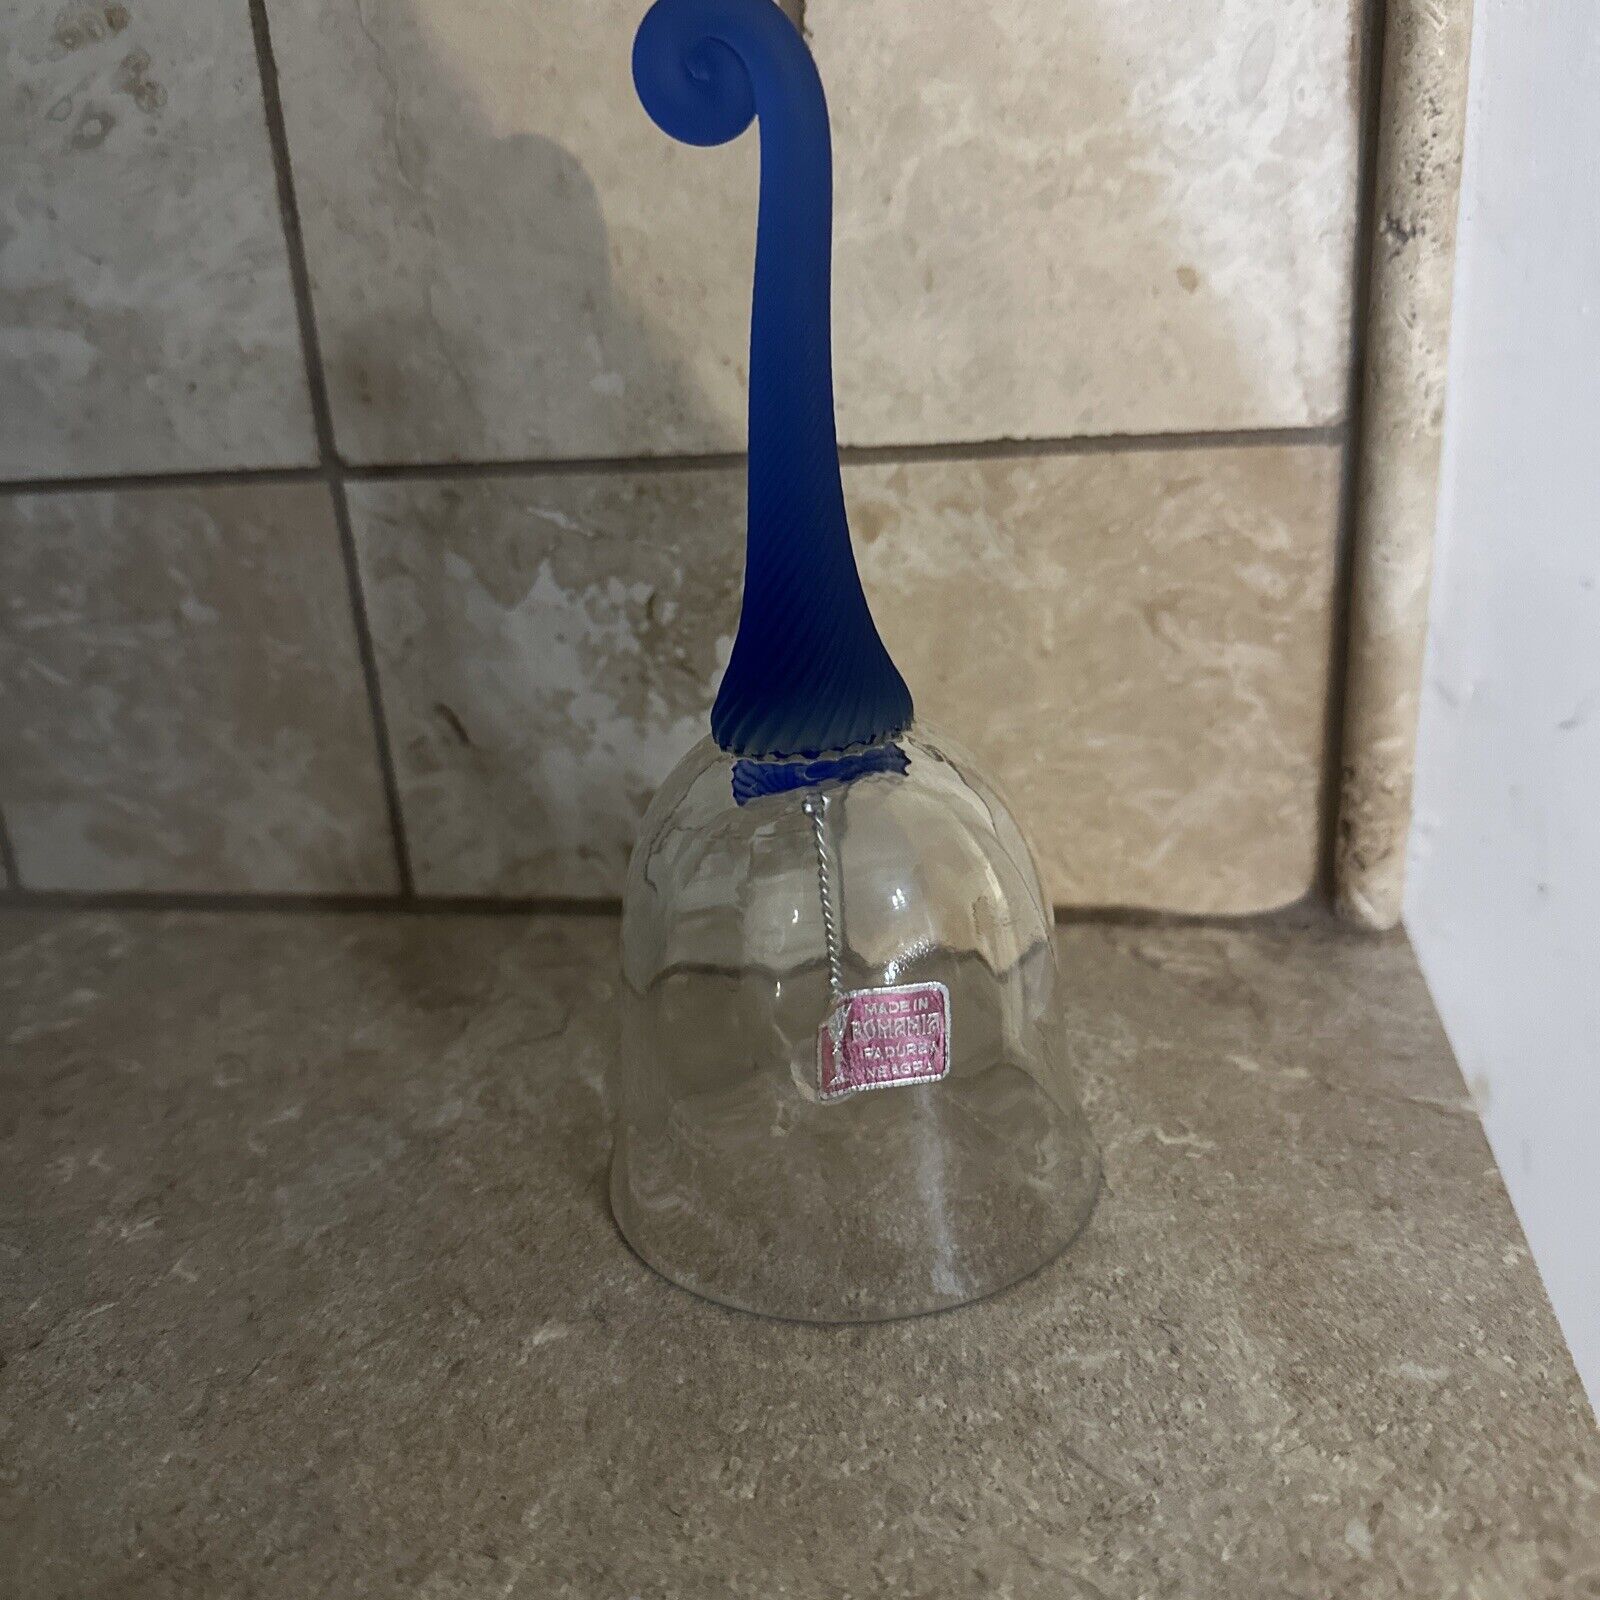 7”VTG Handcrafted Crystal Bell W/Satin Glass Cobalt Blue Handle Made In Romania